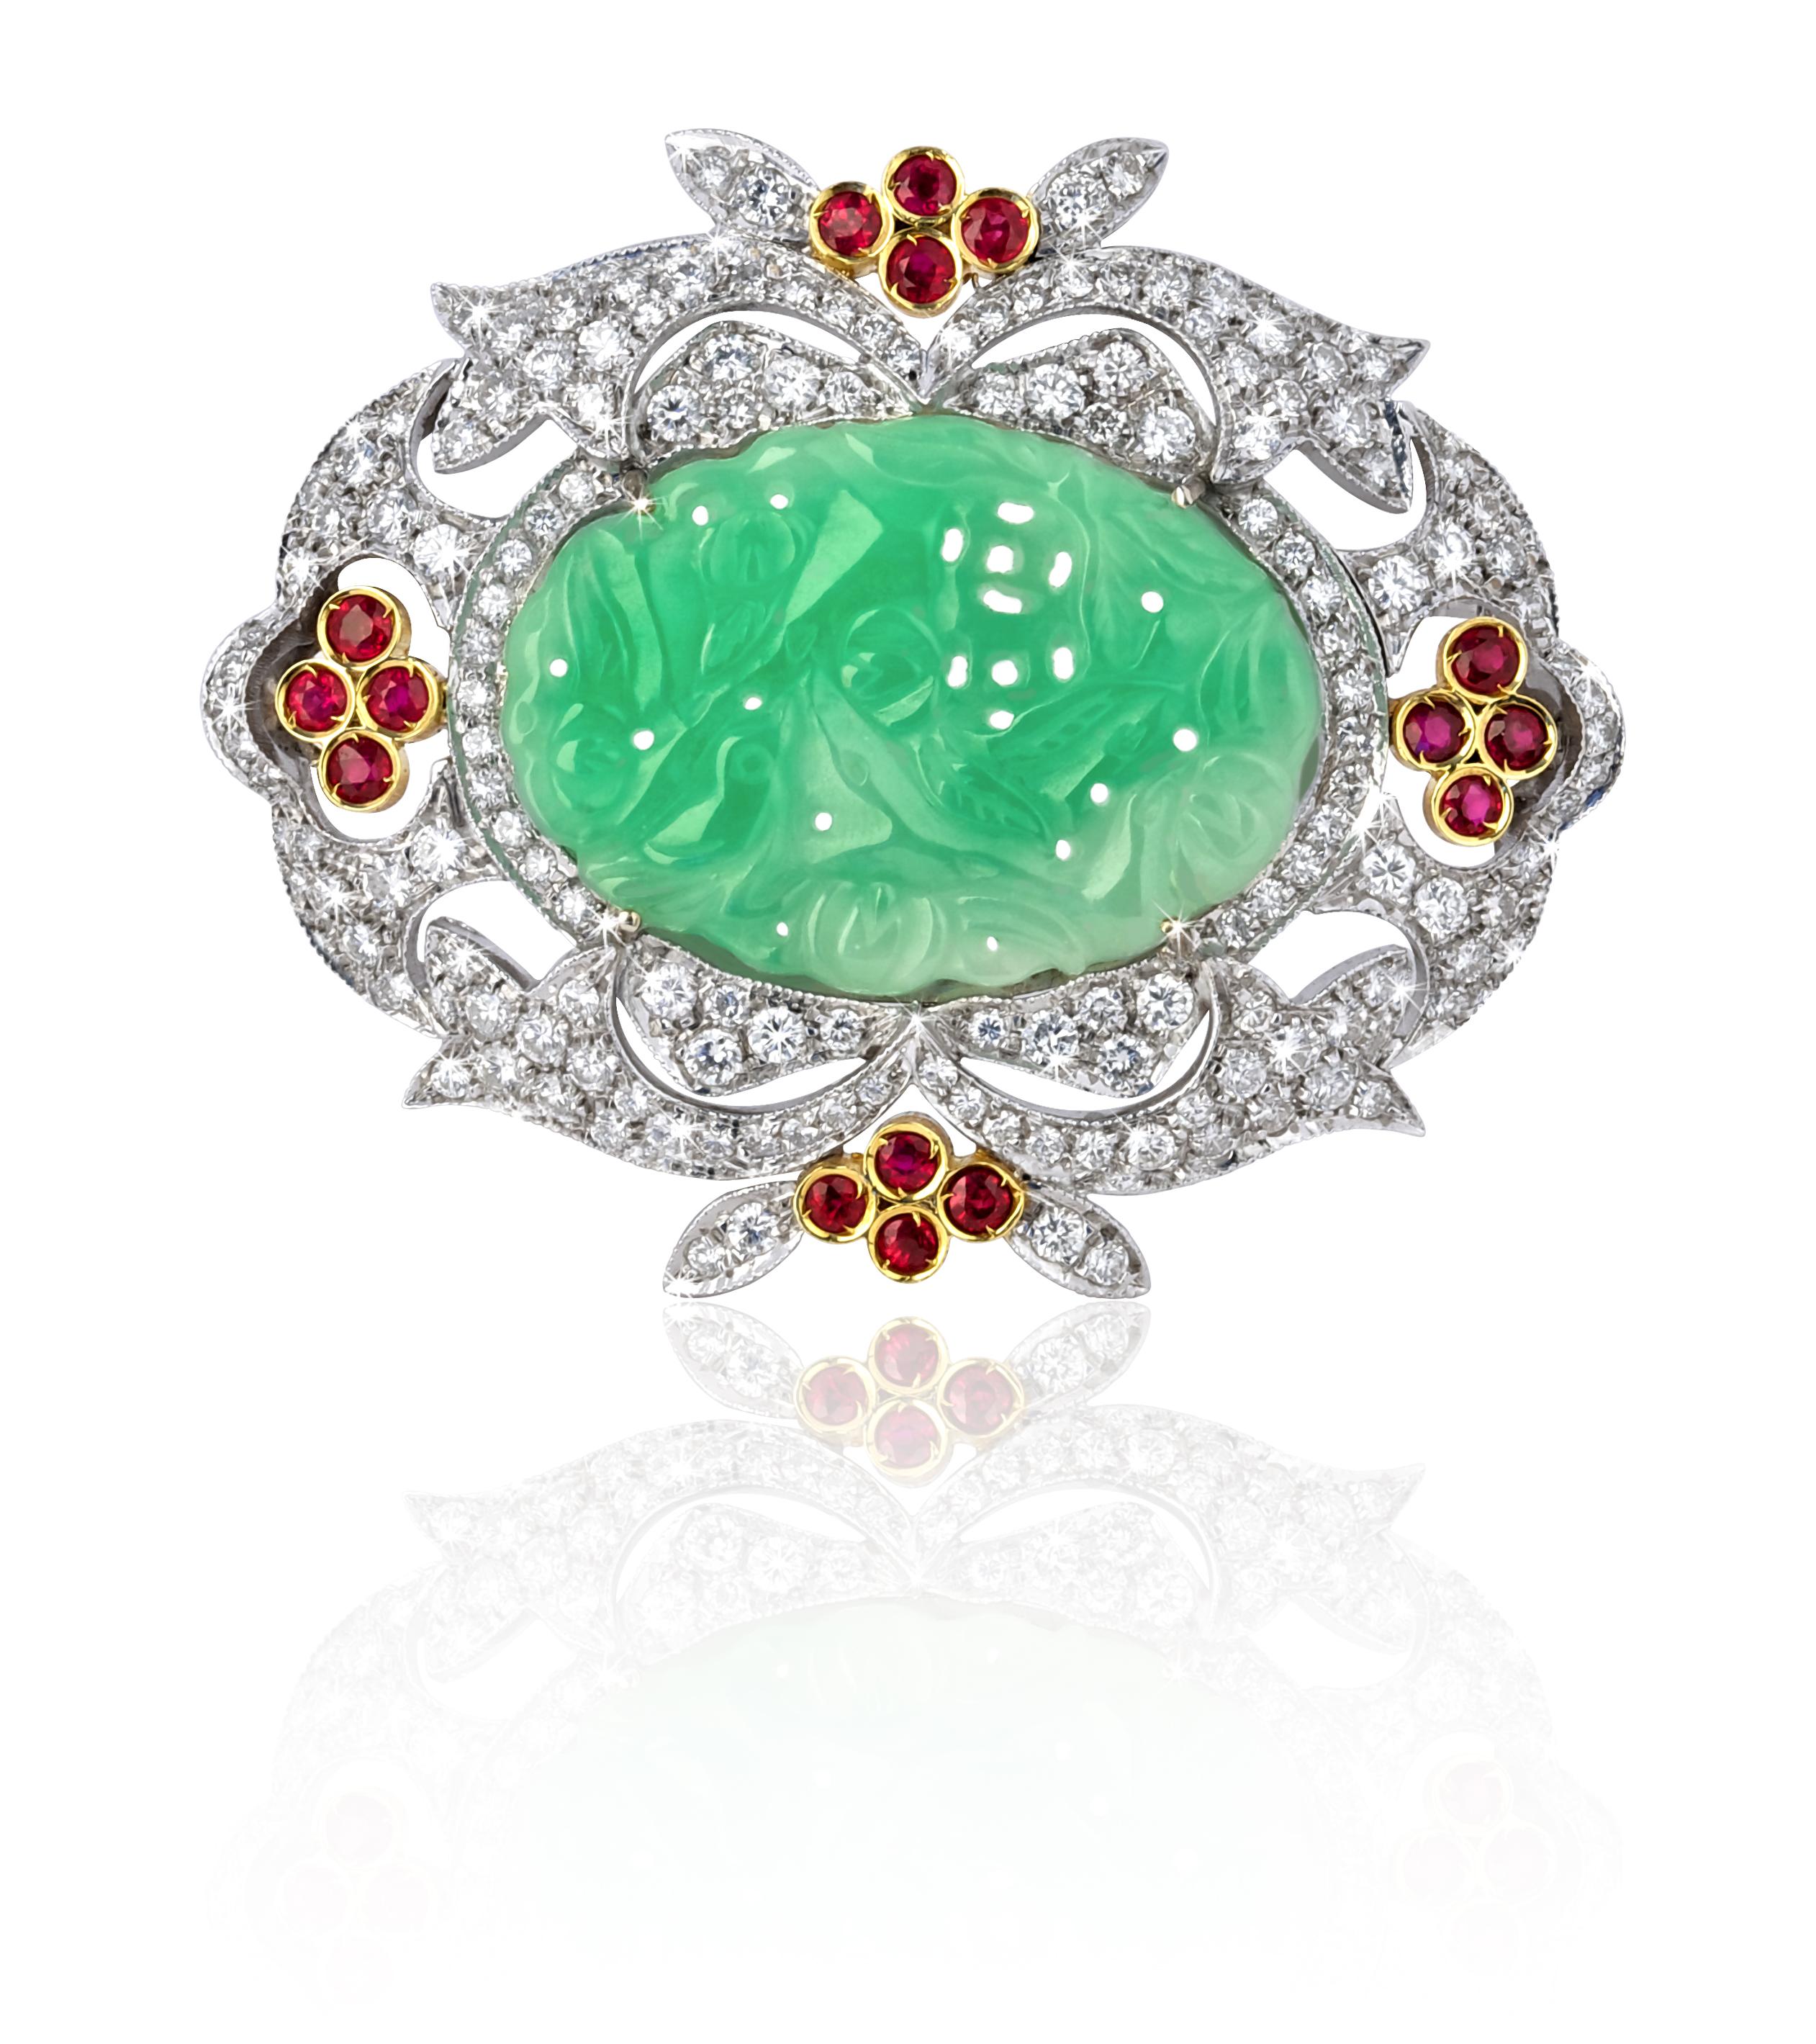 Classical Roman Vintage Jade Brooch From ANGELETTI PRIVATE COLLECTION Gold with Diamonds Rubies For Sale